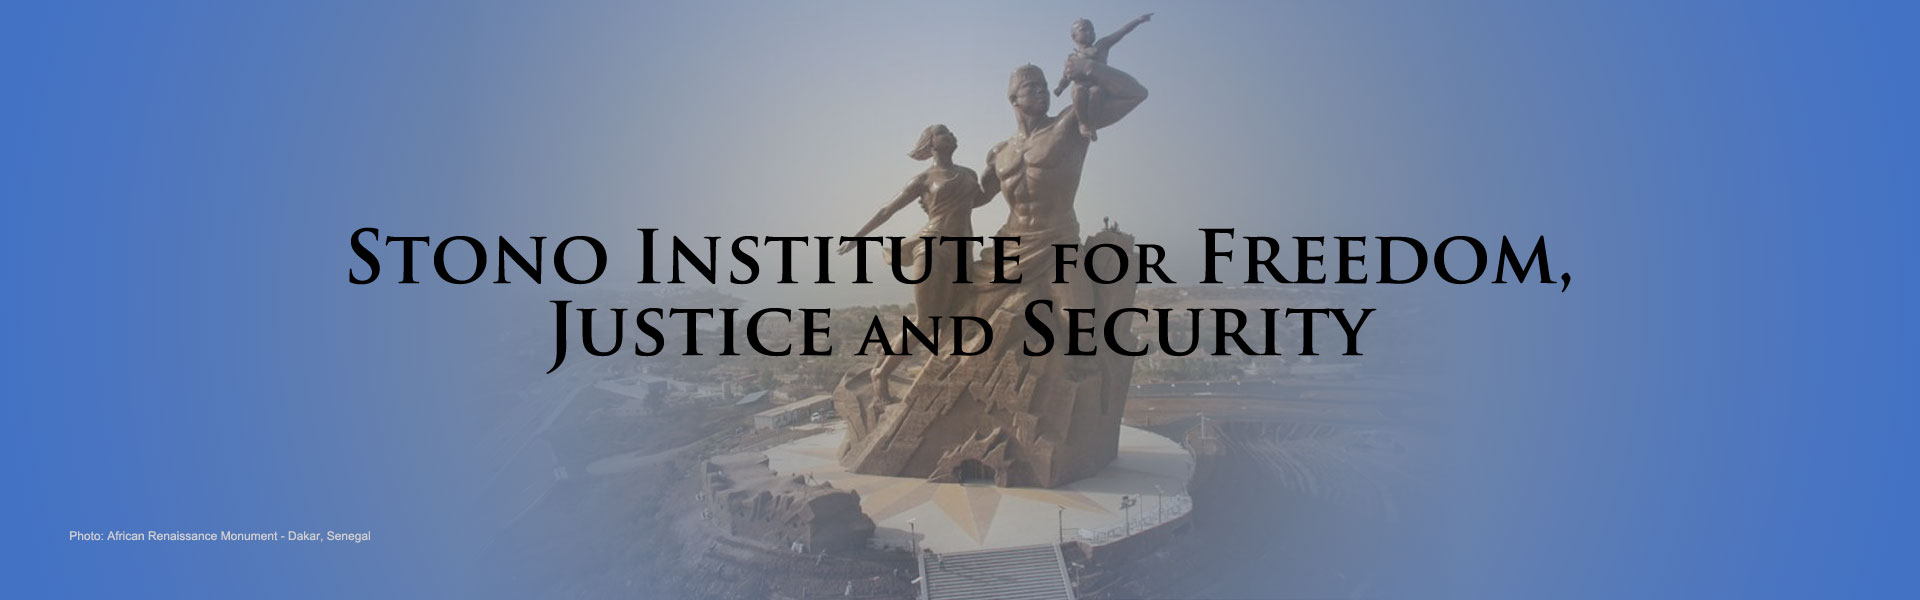 Stono Institute for Freedom, Justice and Security